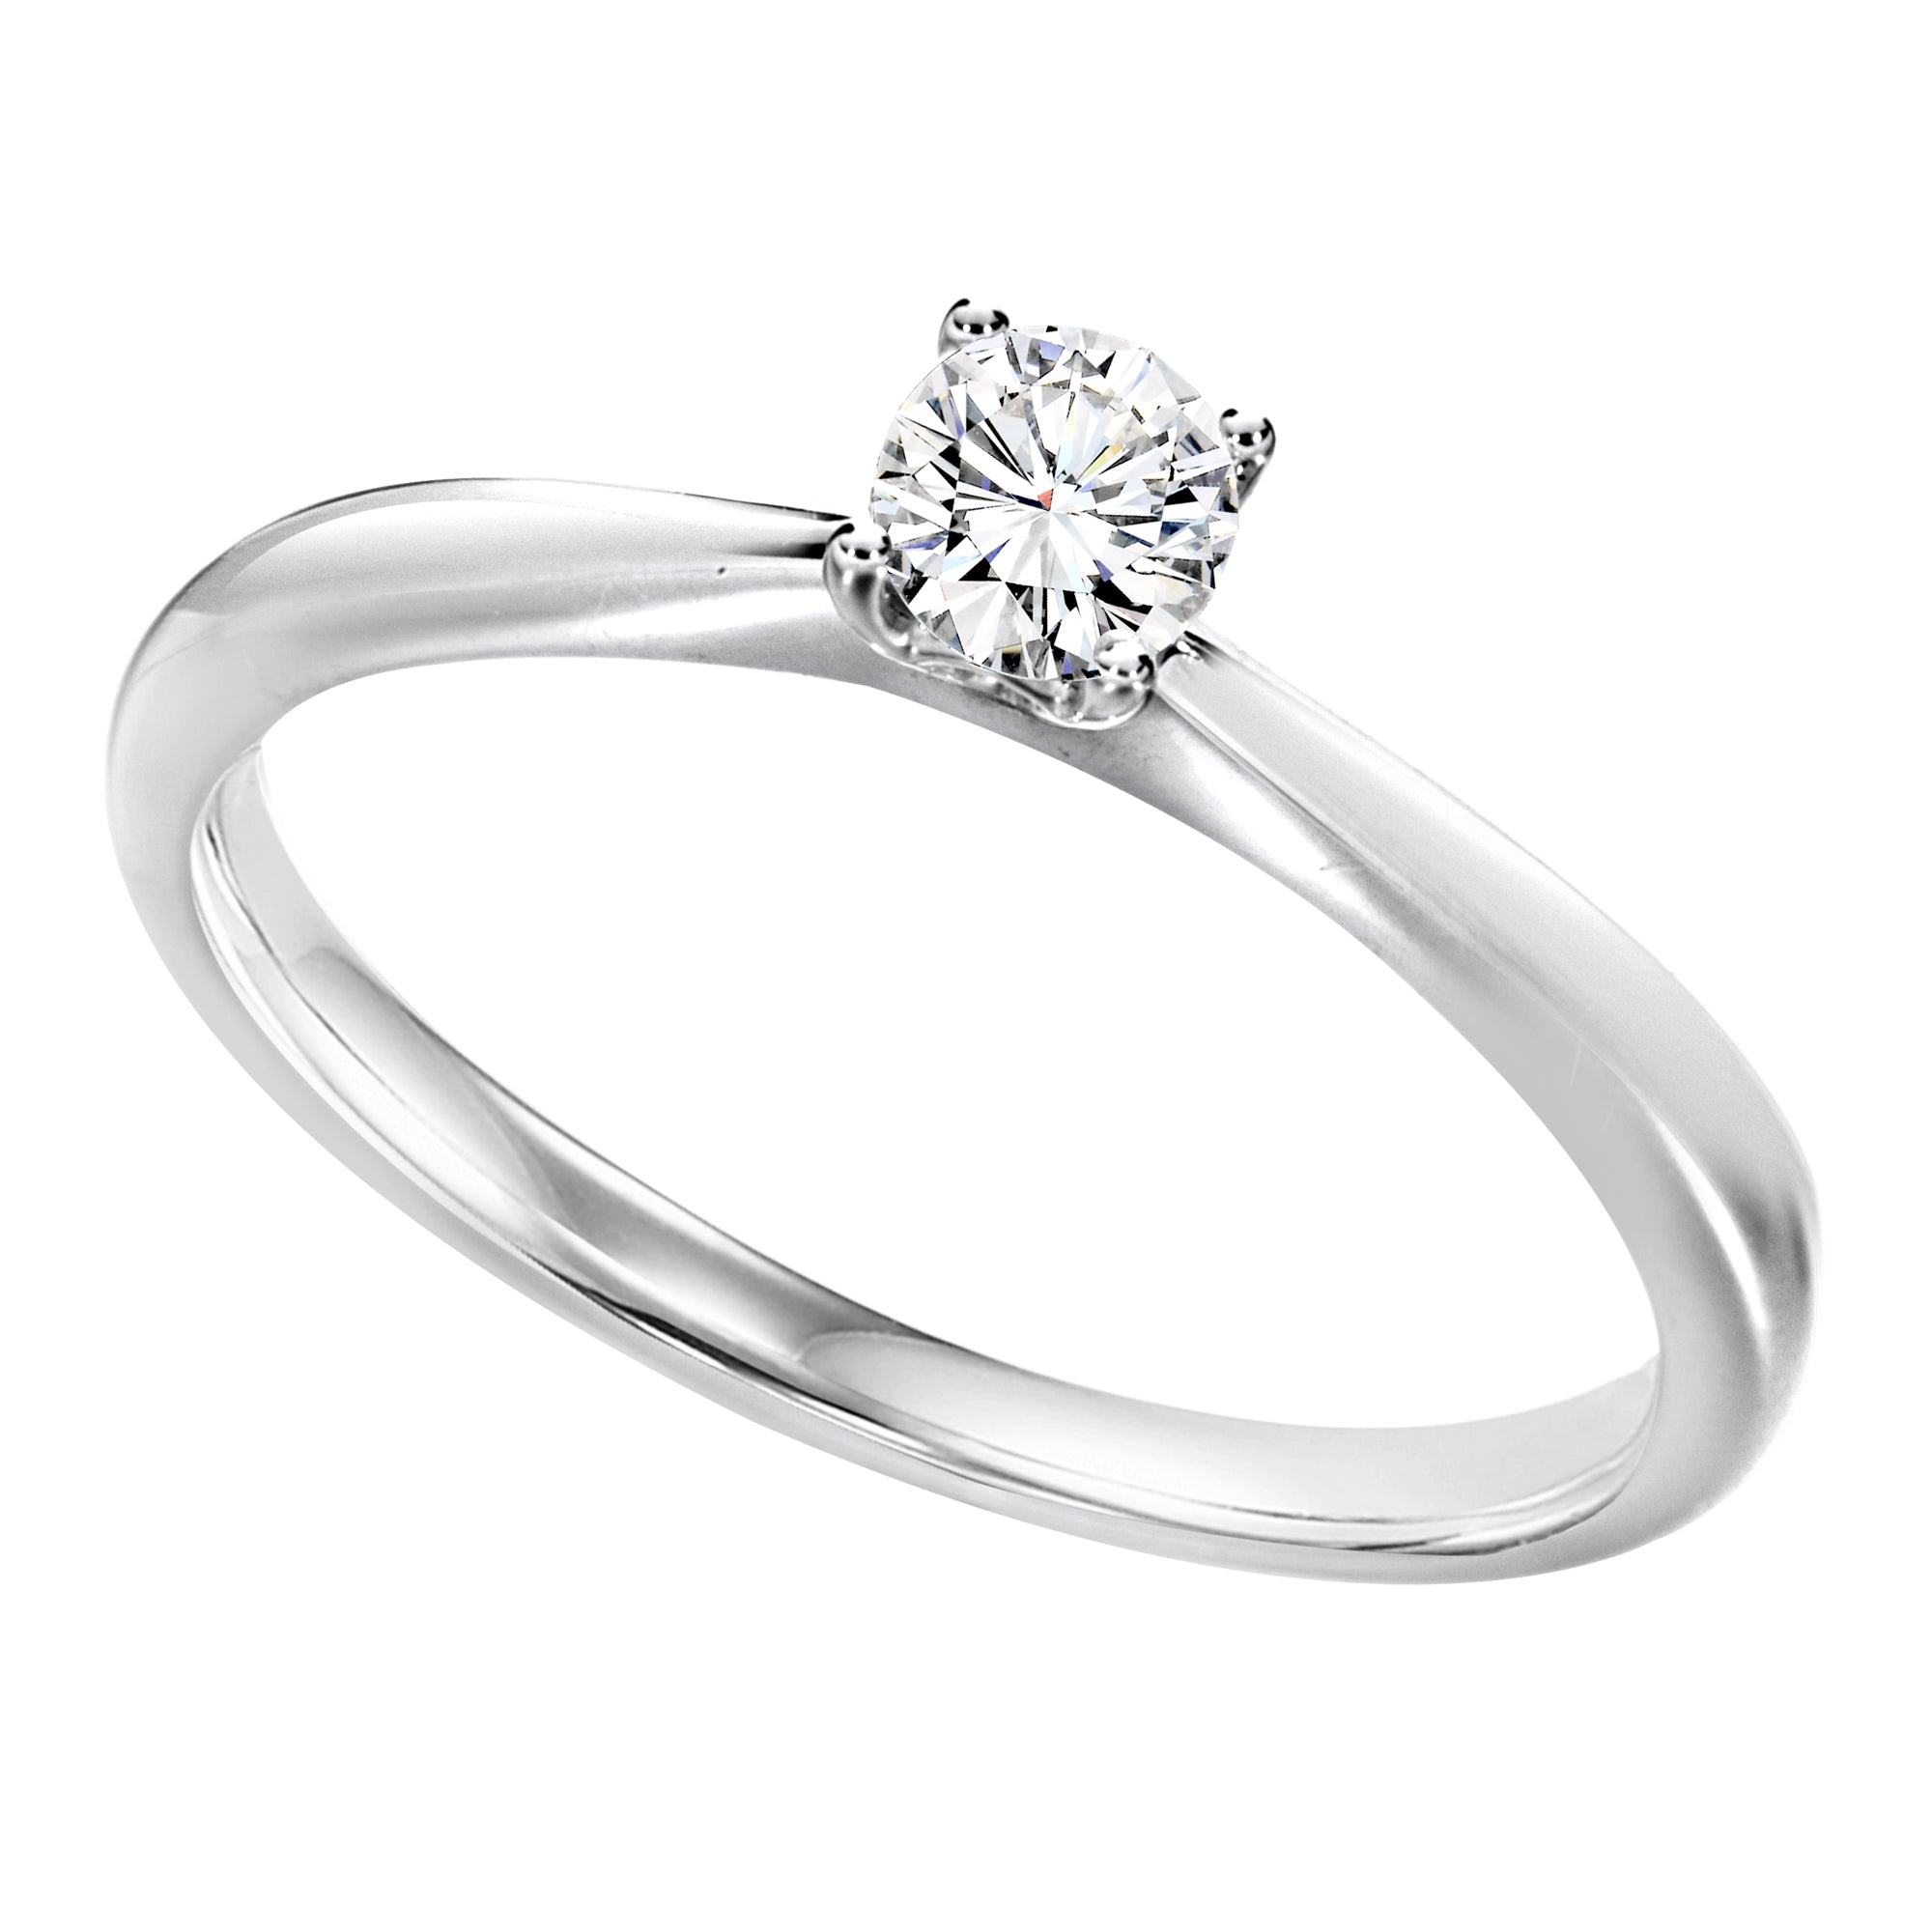 Sterling Silver Cubic Zirconia 0.25ct Ring - AK1009 - Hallmark Jewellers Formby & The Jewellers Bench Widnes